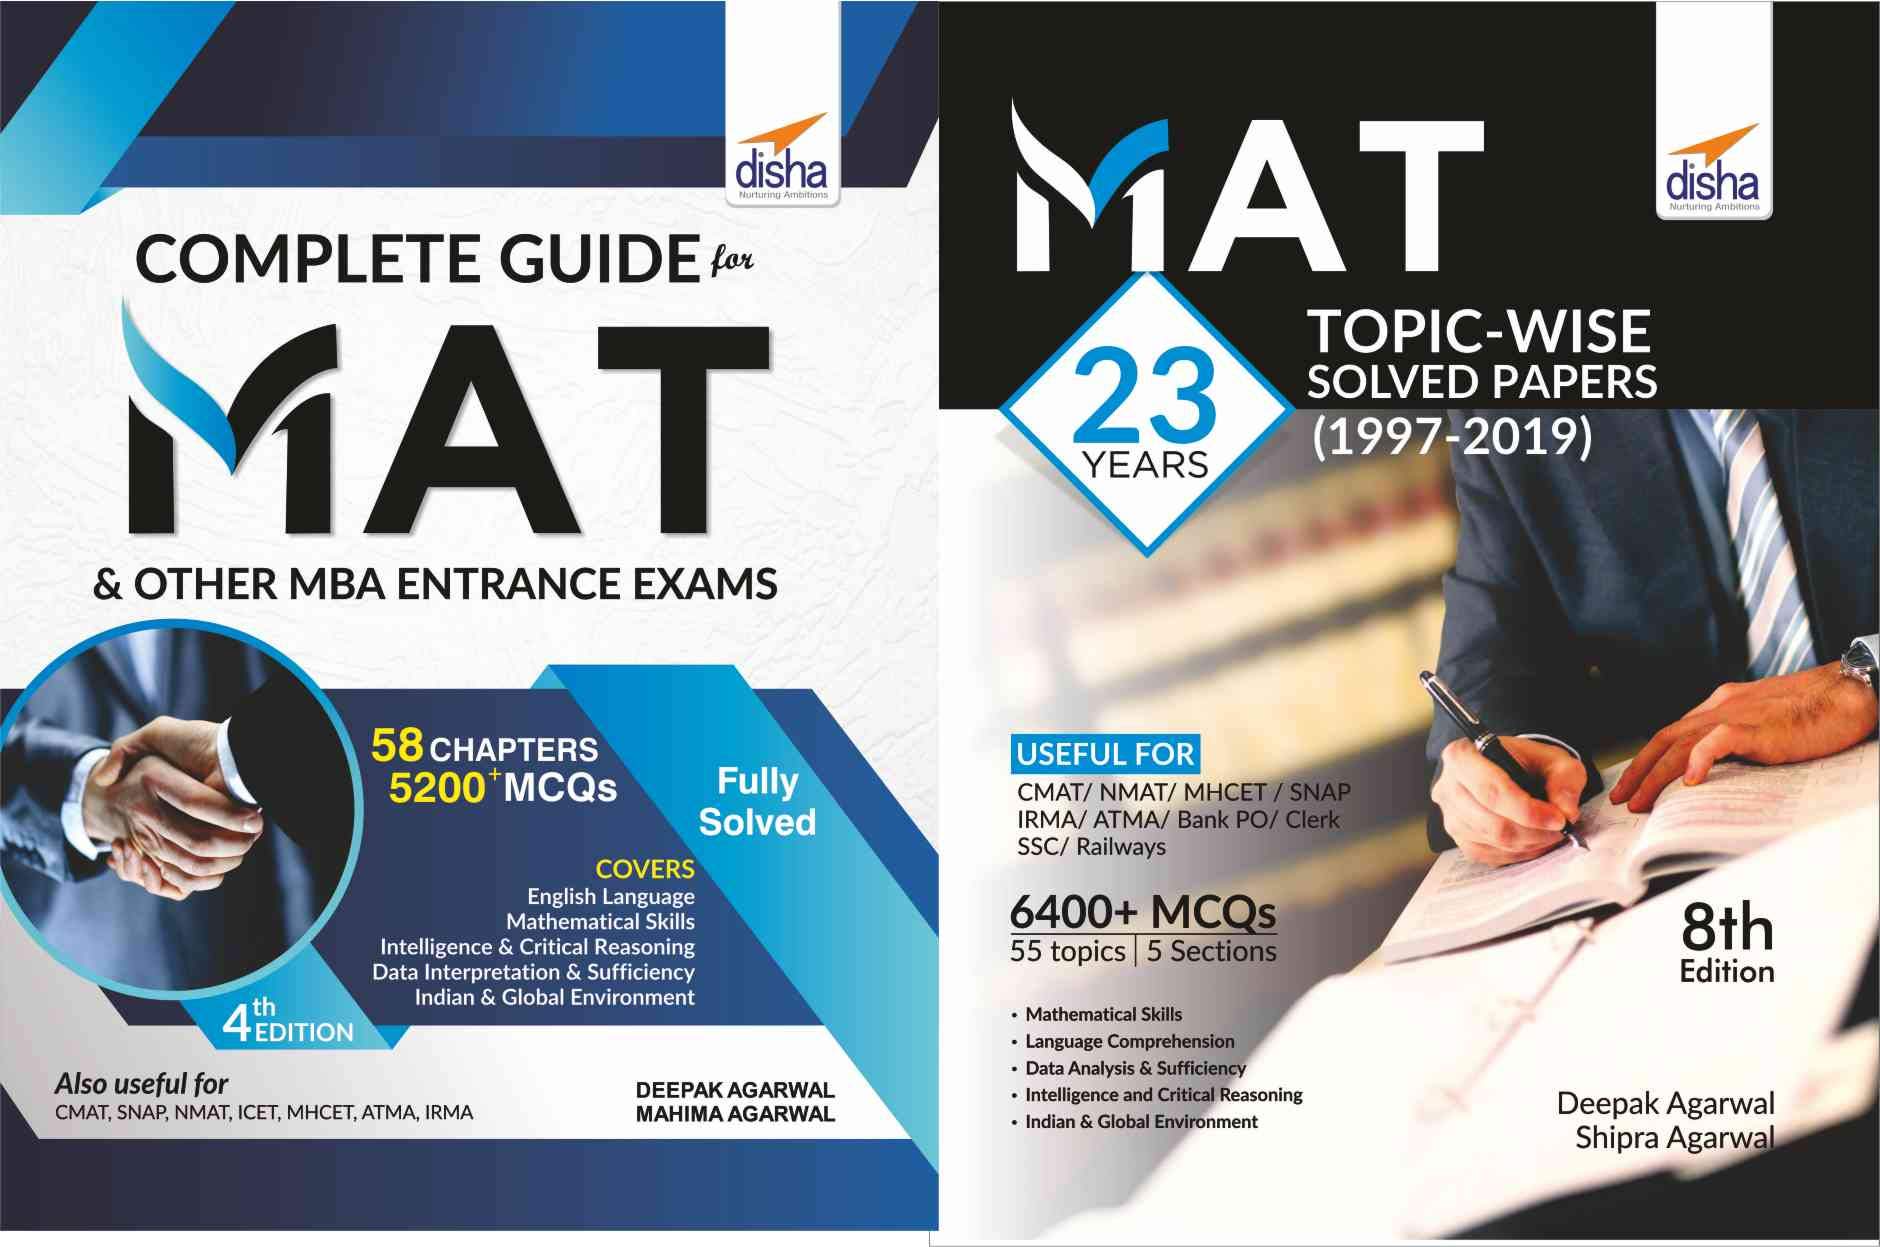 Study materials and textbooks